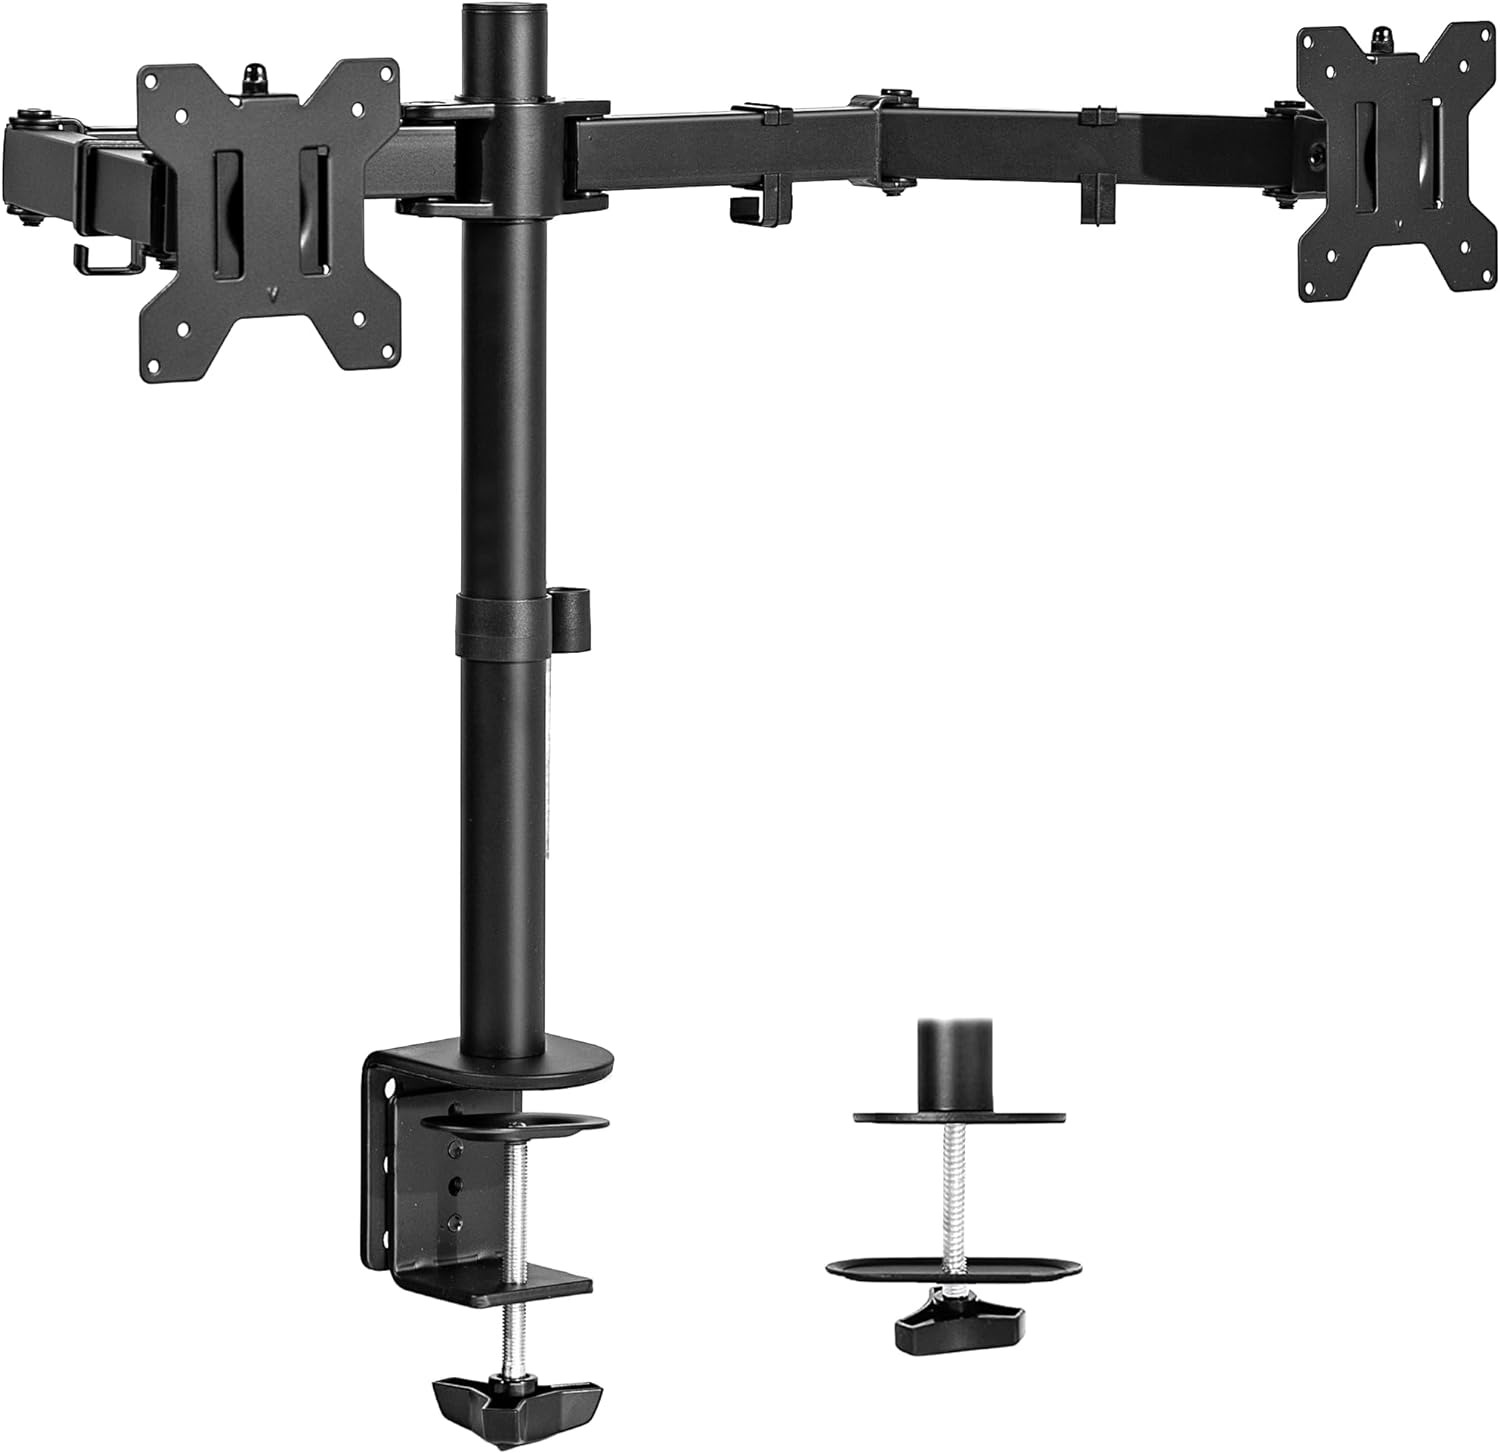 VIVO Dual Monitor Desk Mount, Heavy Duty Fully Adjustable Steel Stand, Holds 2